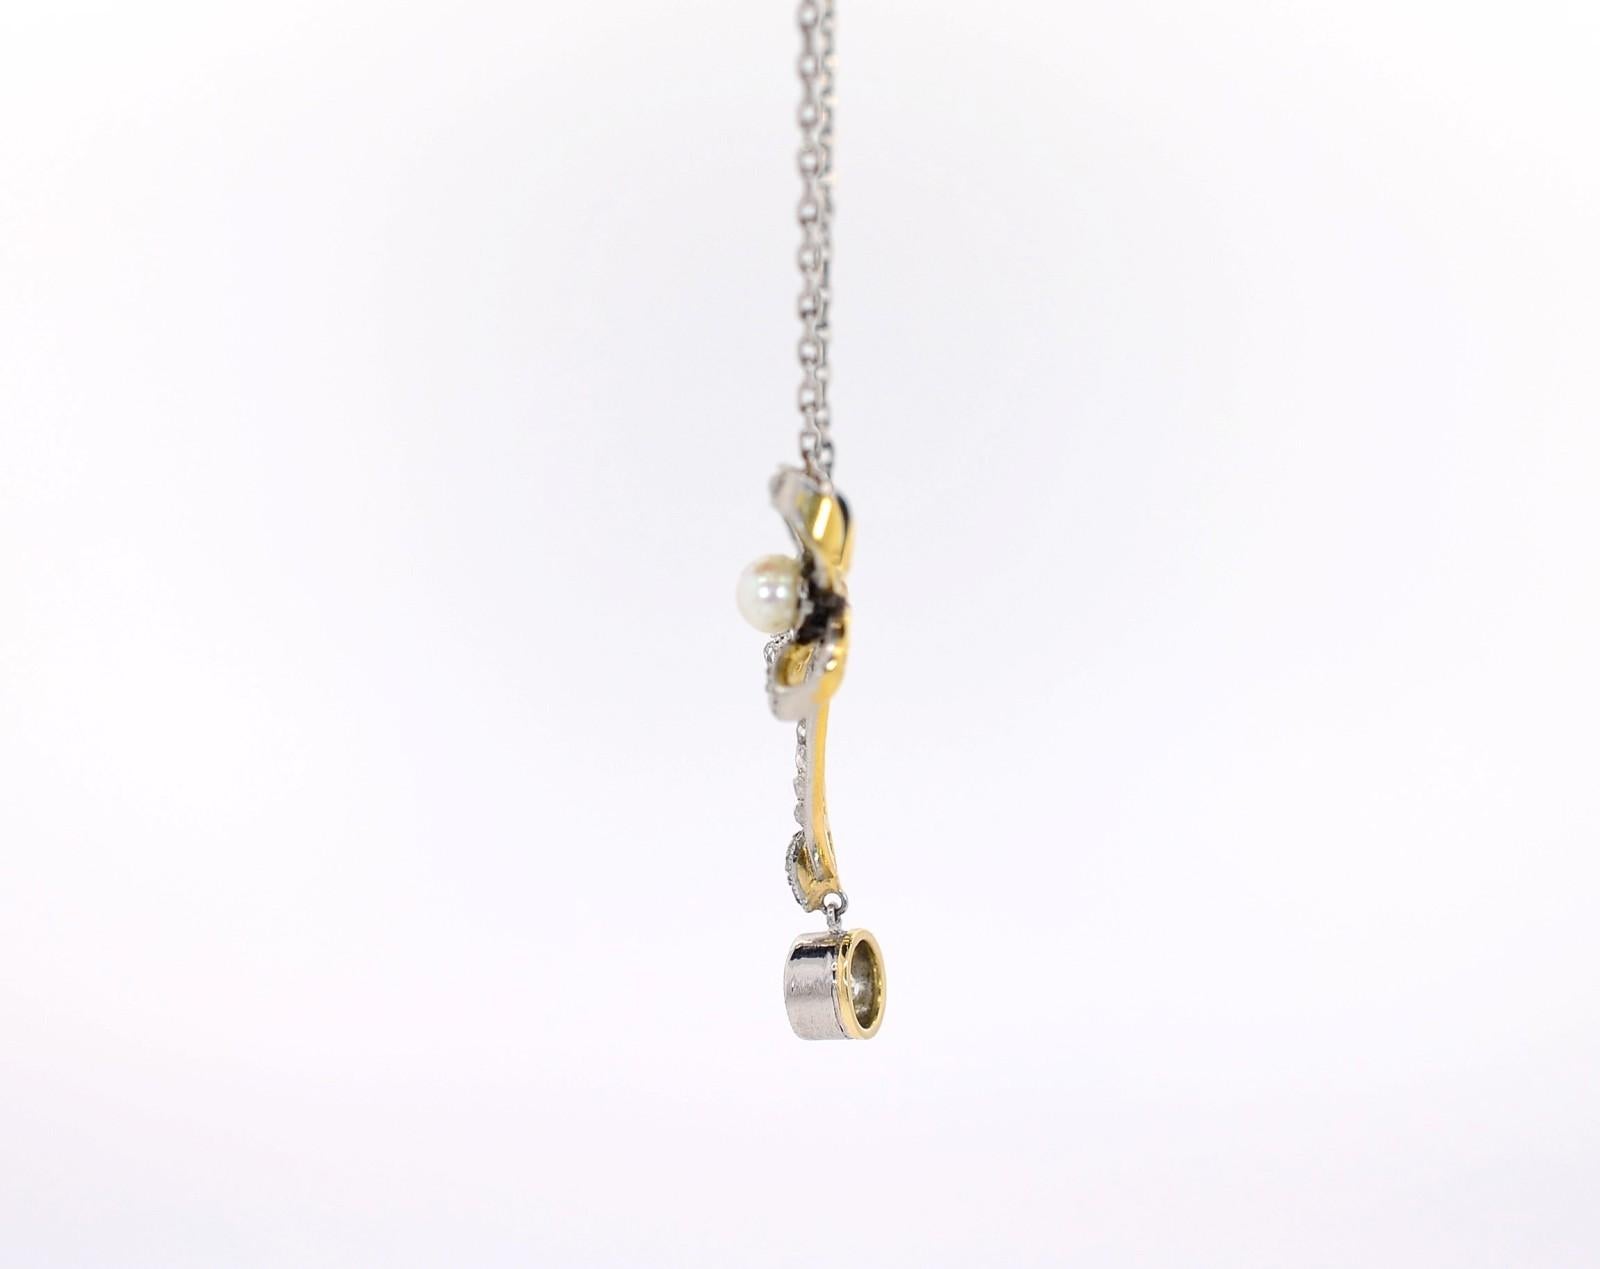 This delightful festoon style antique pendant dates back to the Victorian era 1890s.  Handcrafted of platinum topped 18KT yellow gold, it features bows adorned with two natural white Pearls and resplendent Rose cut Diamonds.  It dangles a sparkly